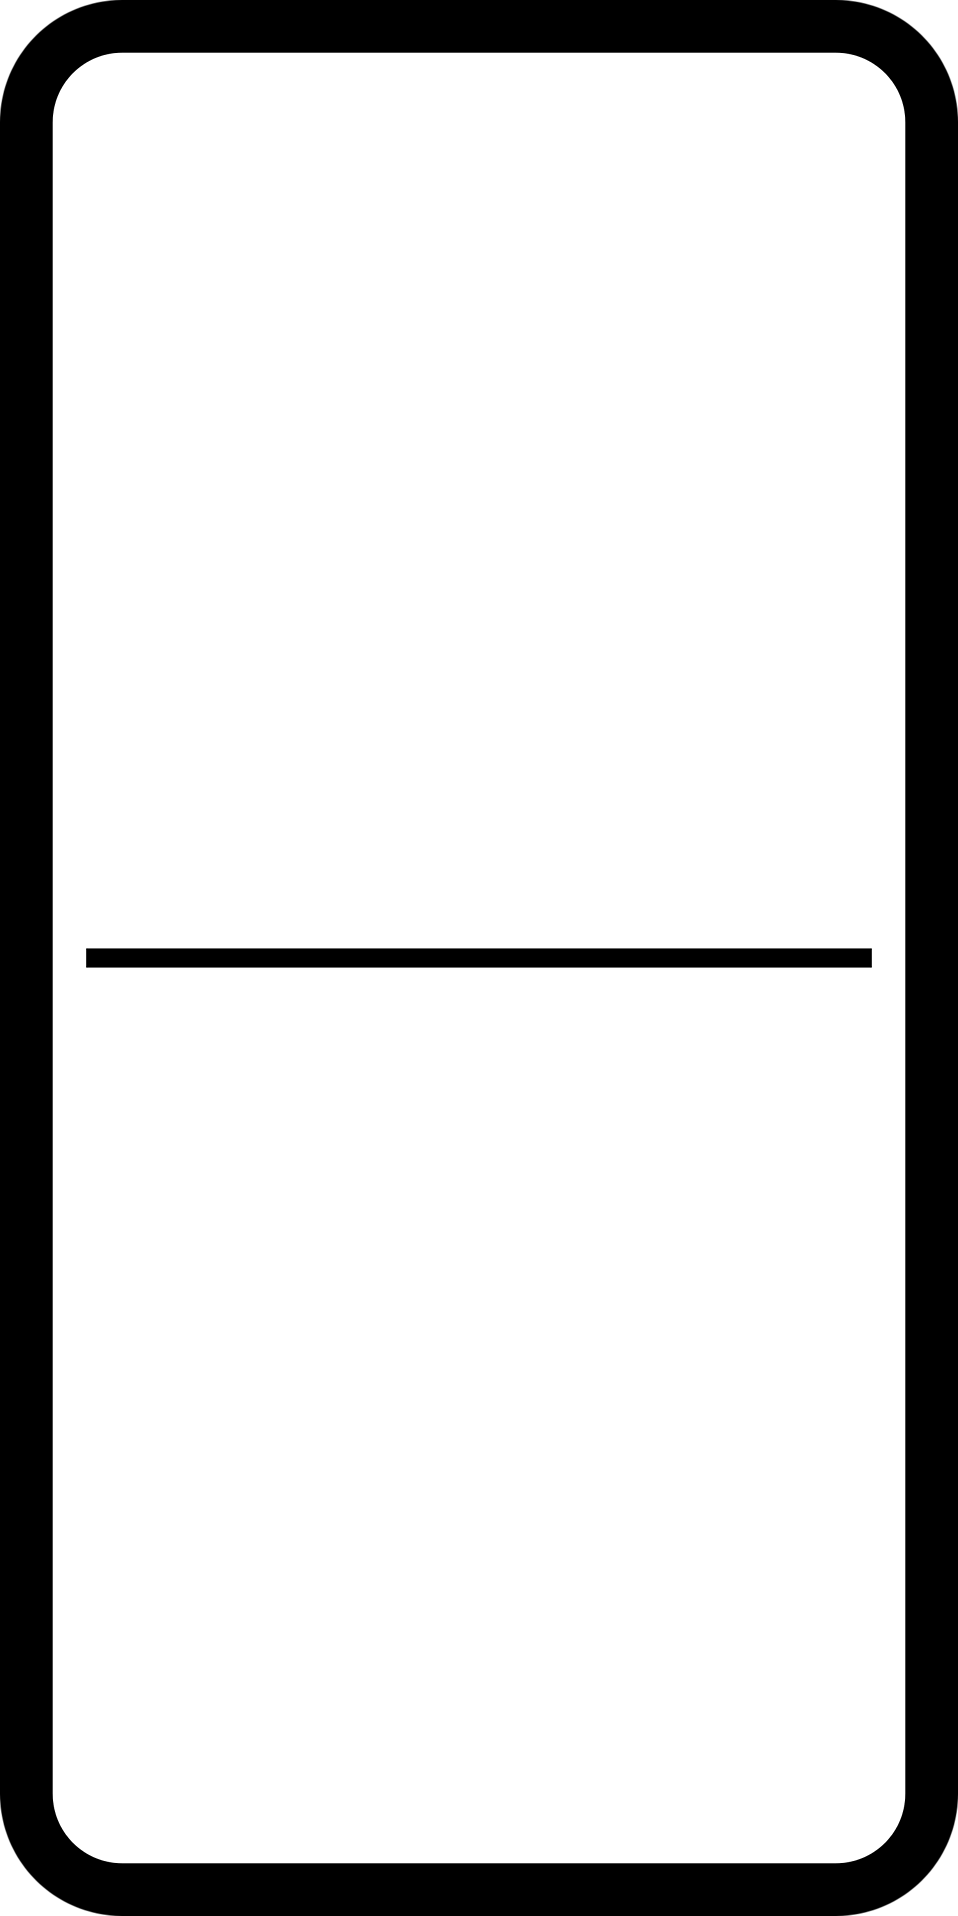 Illustration Of A Blank Domino Tile With A Transparent Background